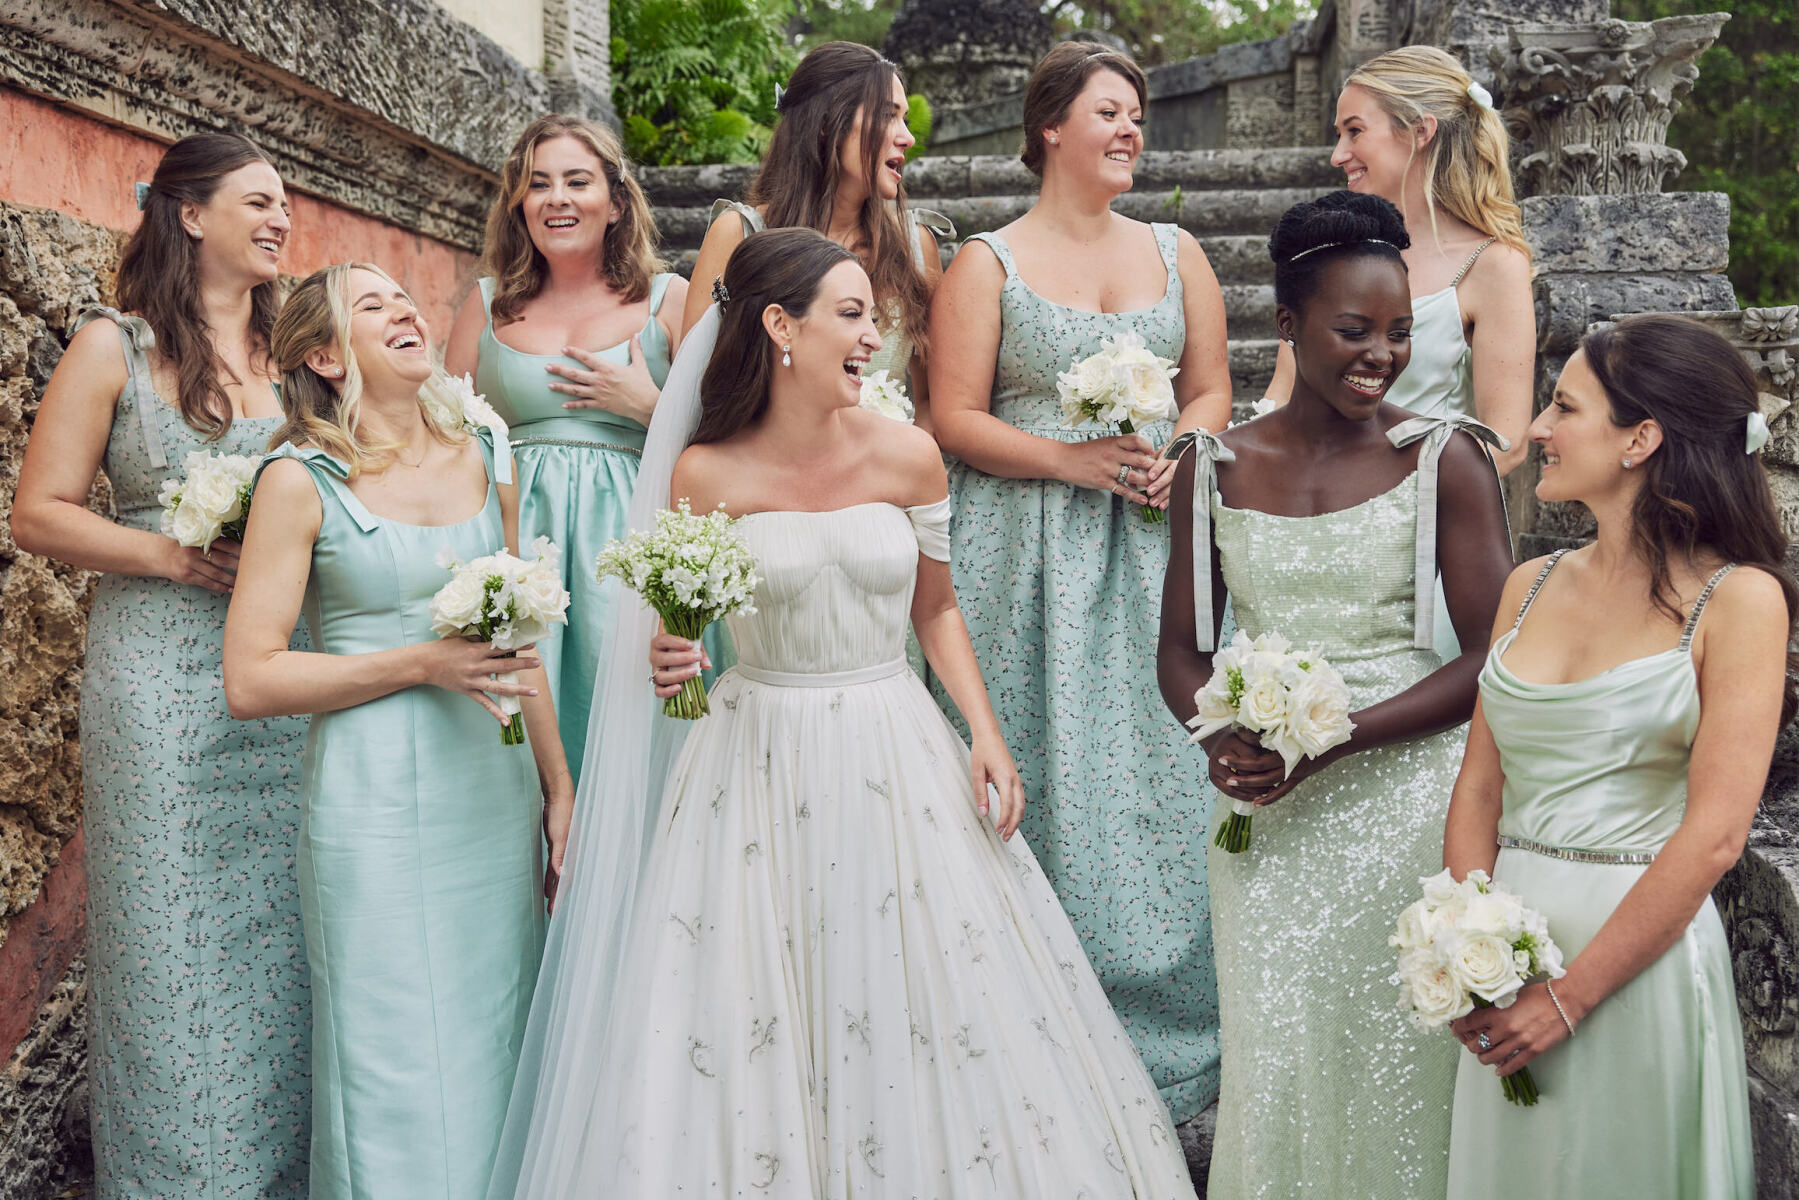 Wedding Dress Shopping: A bride laughing with her bridesmaids, who are all dressed in shades of green.